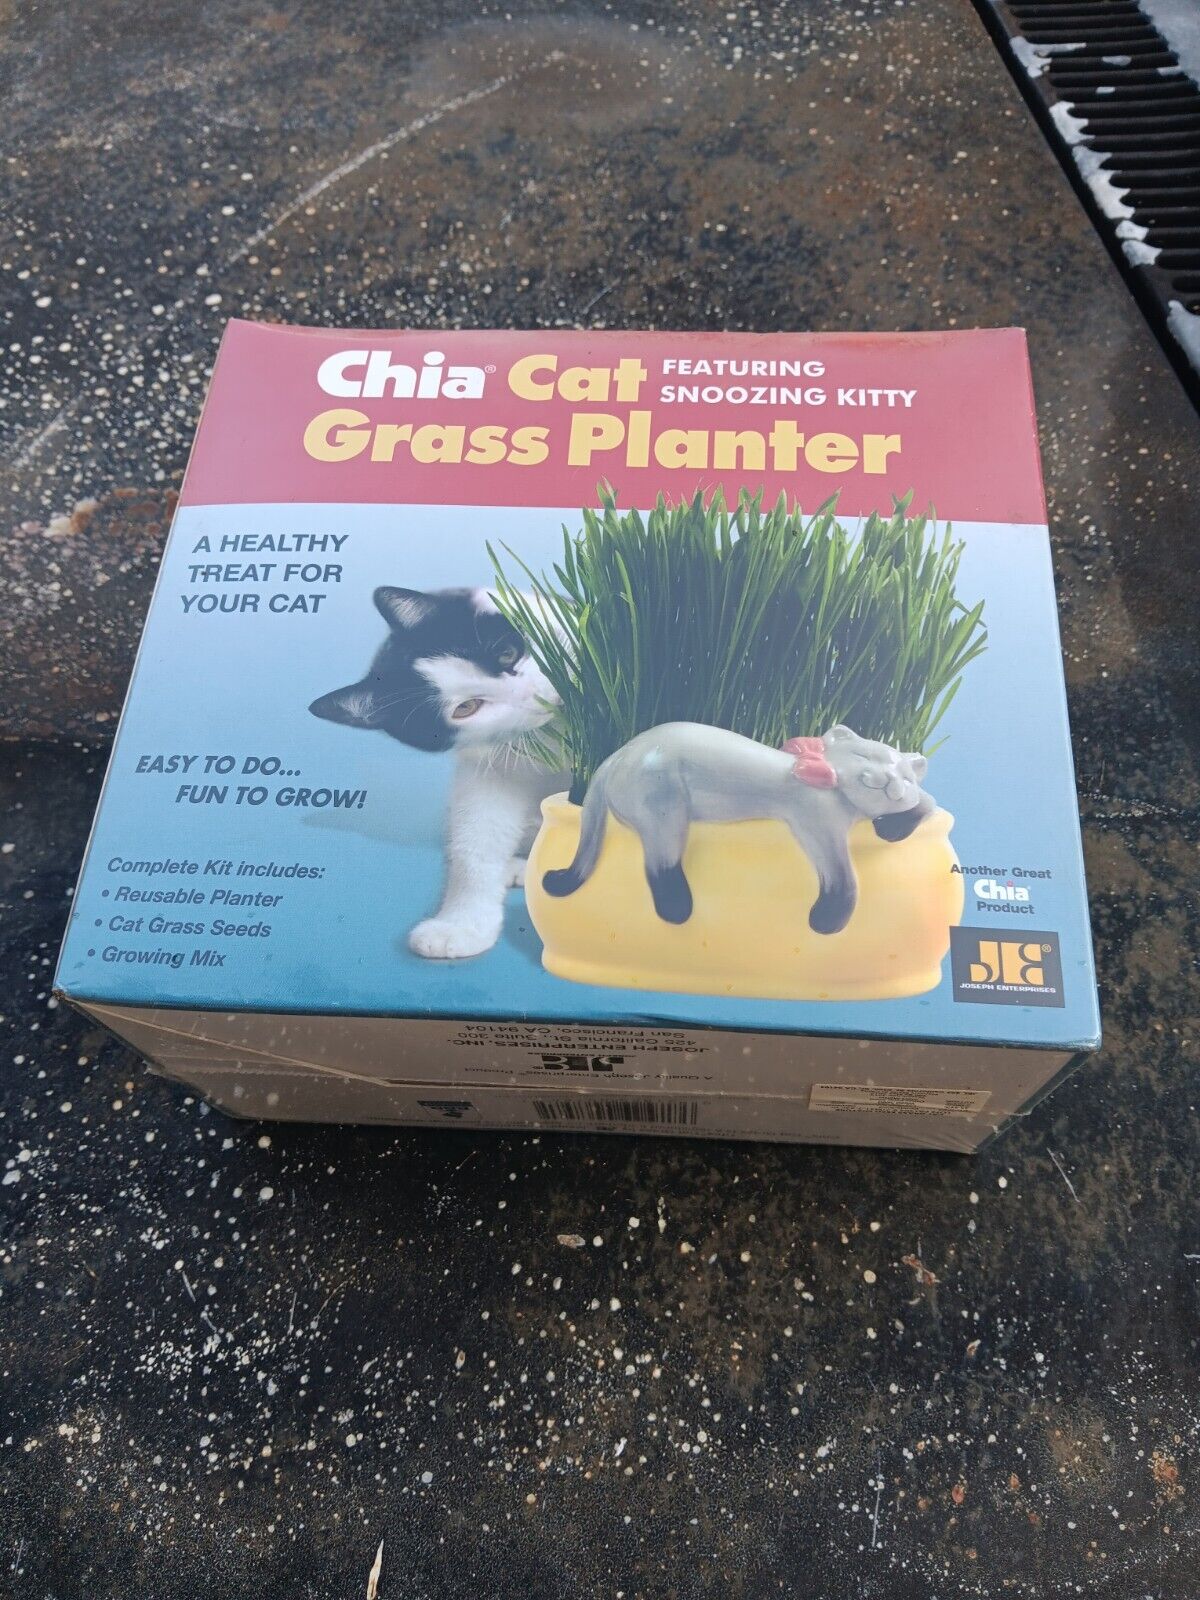 Chia Pet Cat Grass Treat Decorative Planter Featuring Snoozing Kitty/ SEALED